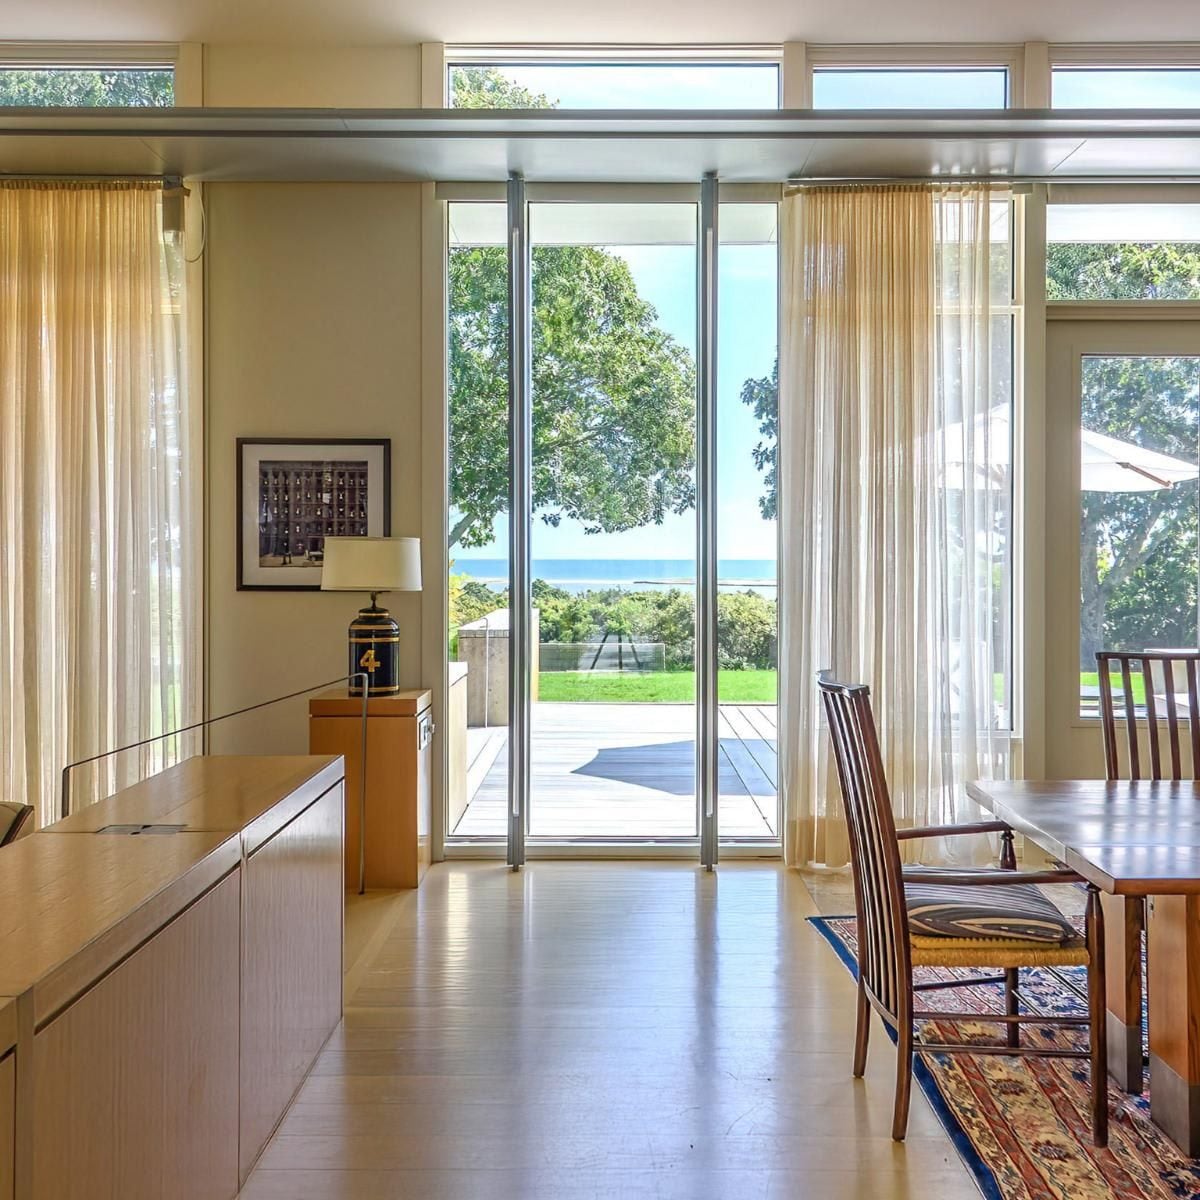 Obama's Martha's Vineyard vacation home is on sale